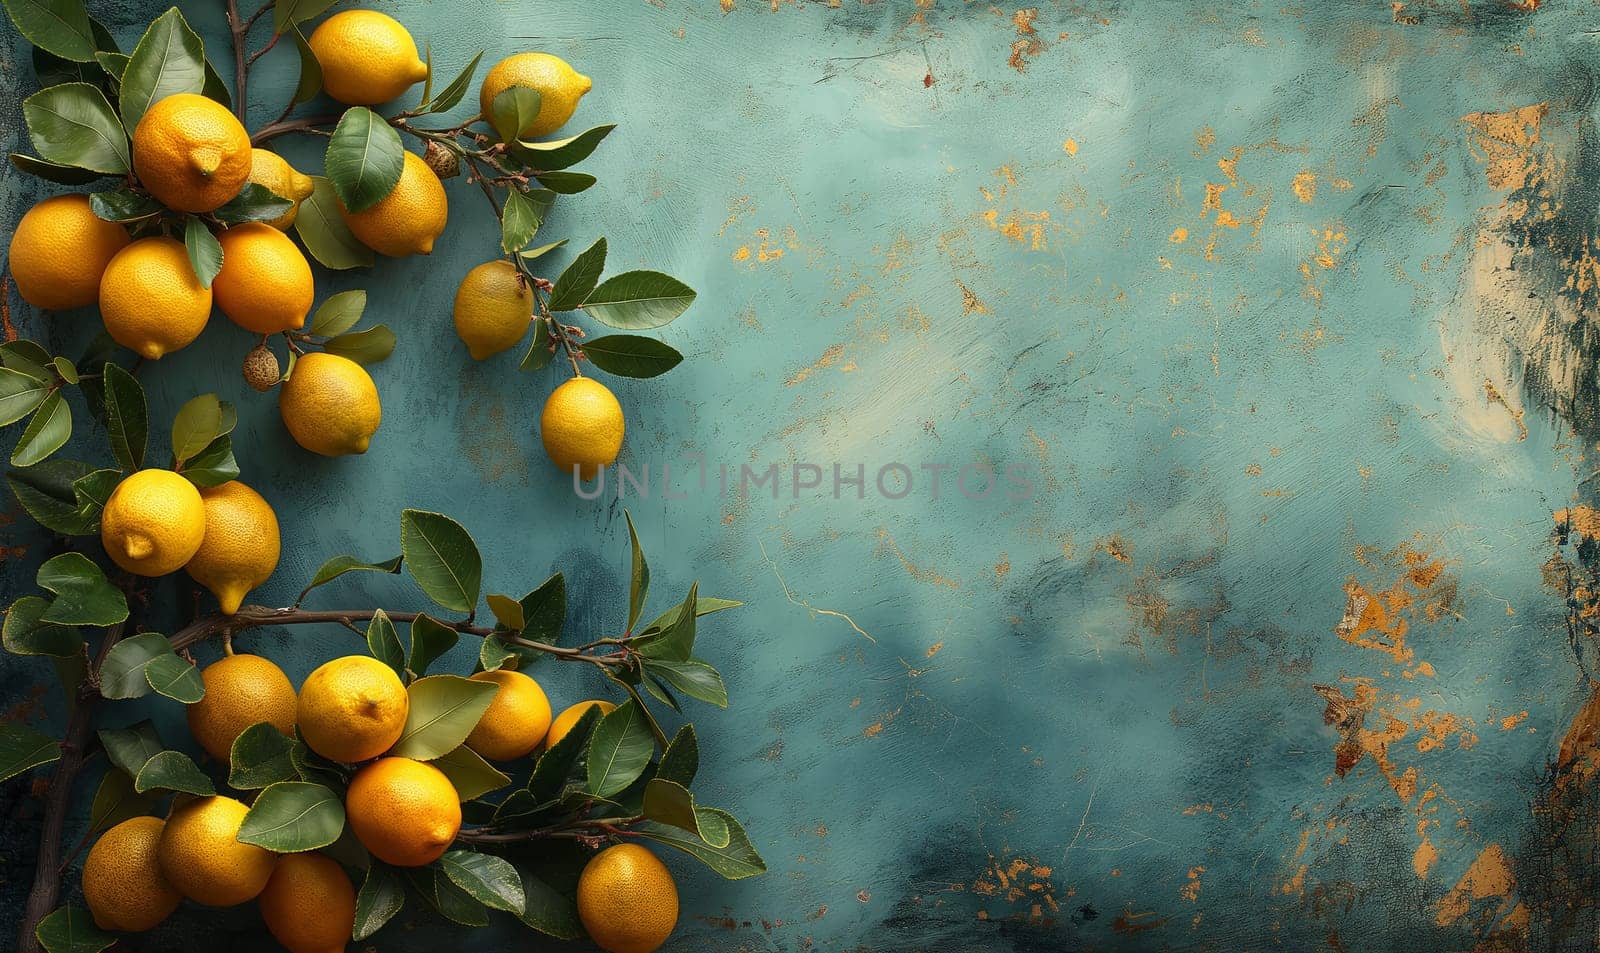 Vibrant lemons with green leaves on textured surface.